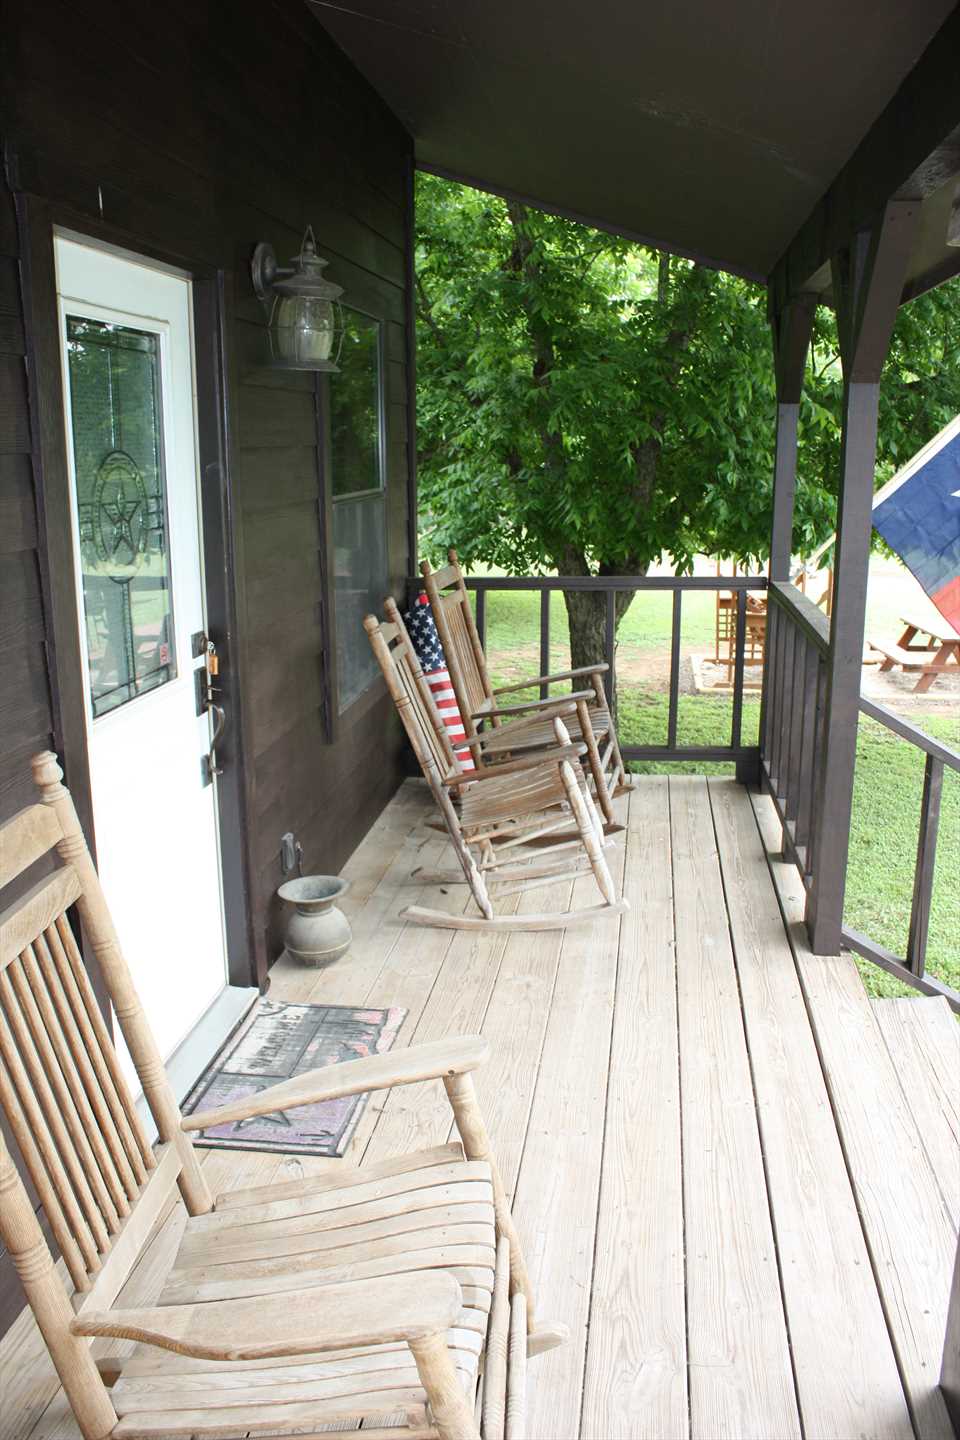                                                 Stretch your legs and enjoy a peaceful moment or two on the country-style rockers on the front porch!